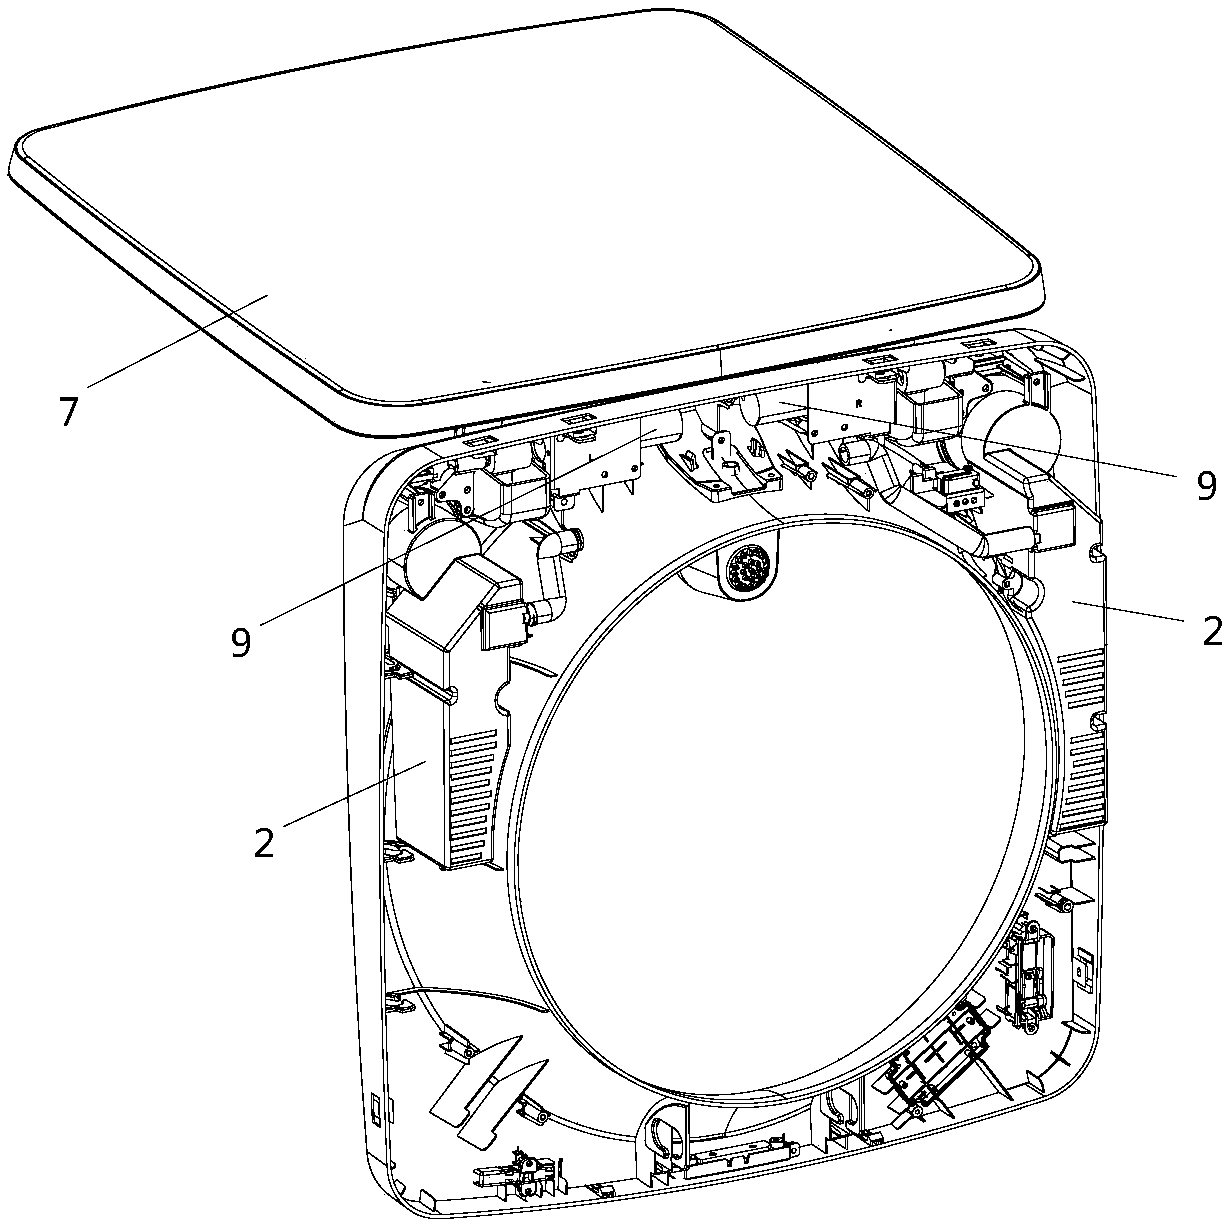 Disc base structure of washing machine and washing machine with disc base structure